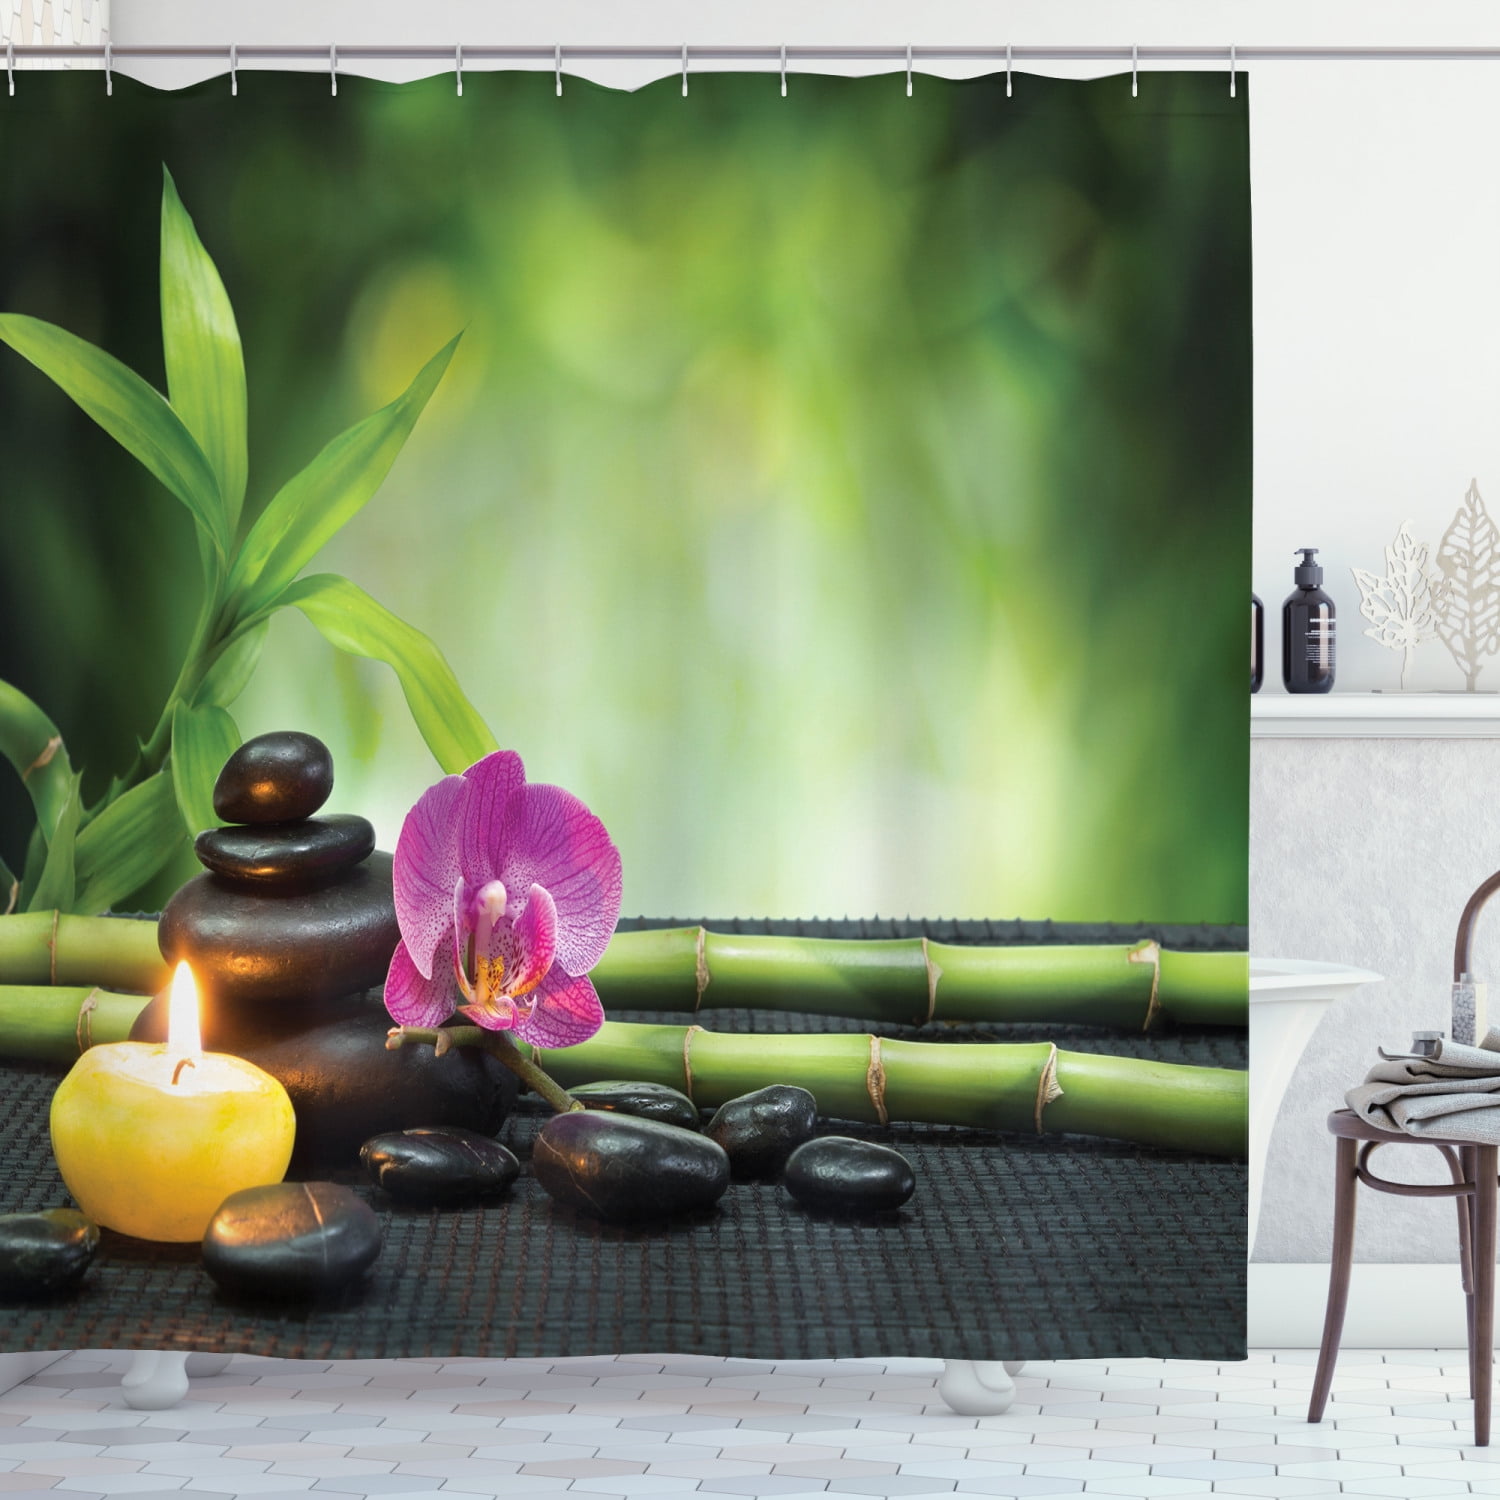 Spa Shower Curtain Calming Stones Bamboo Decor Print for Bathroom 71 Inches Long